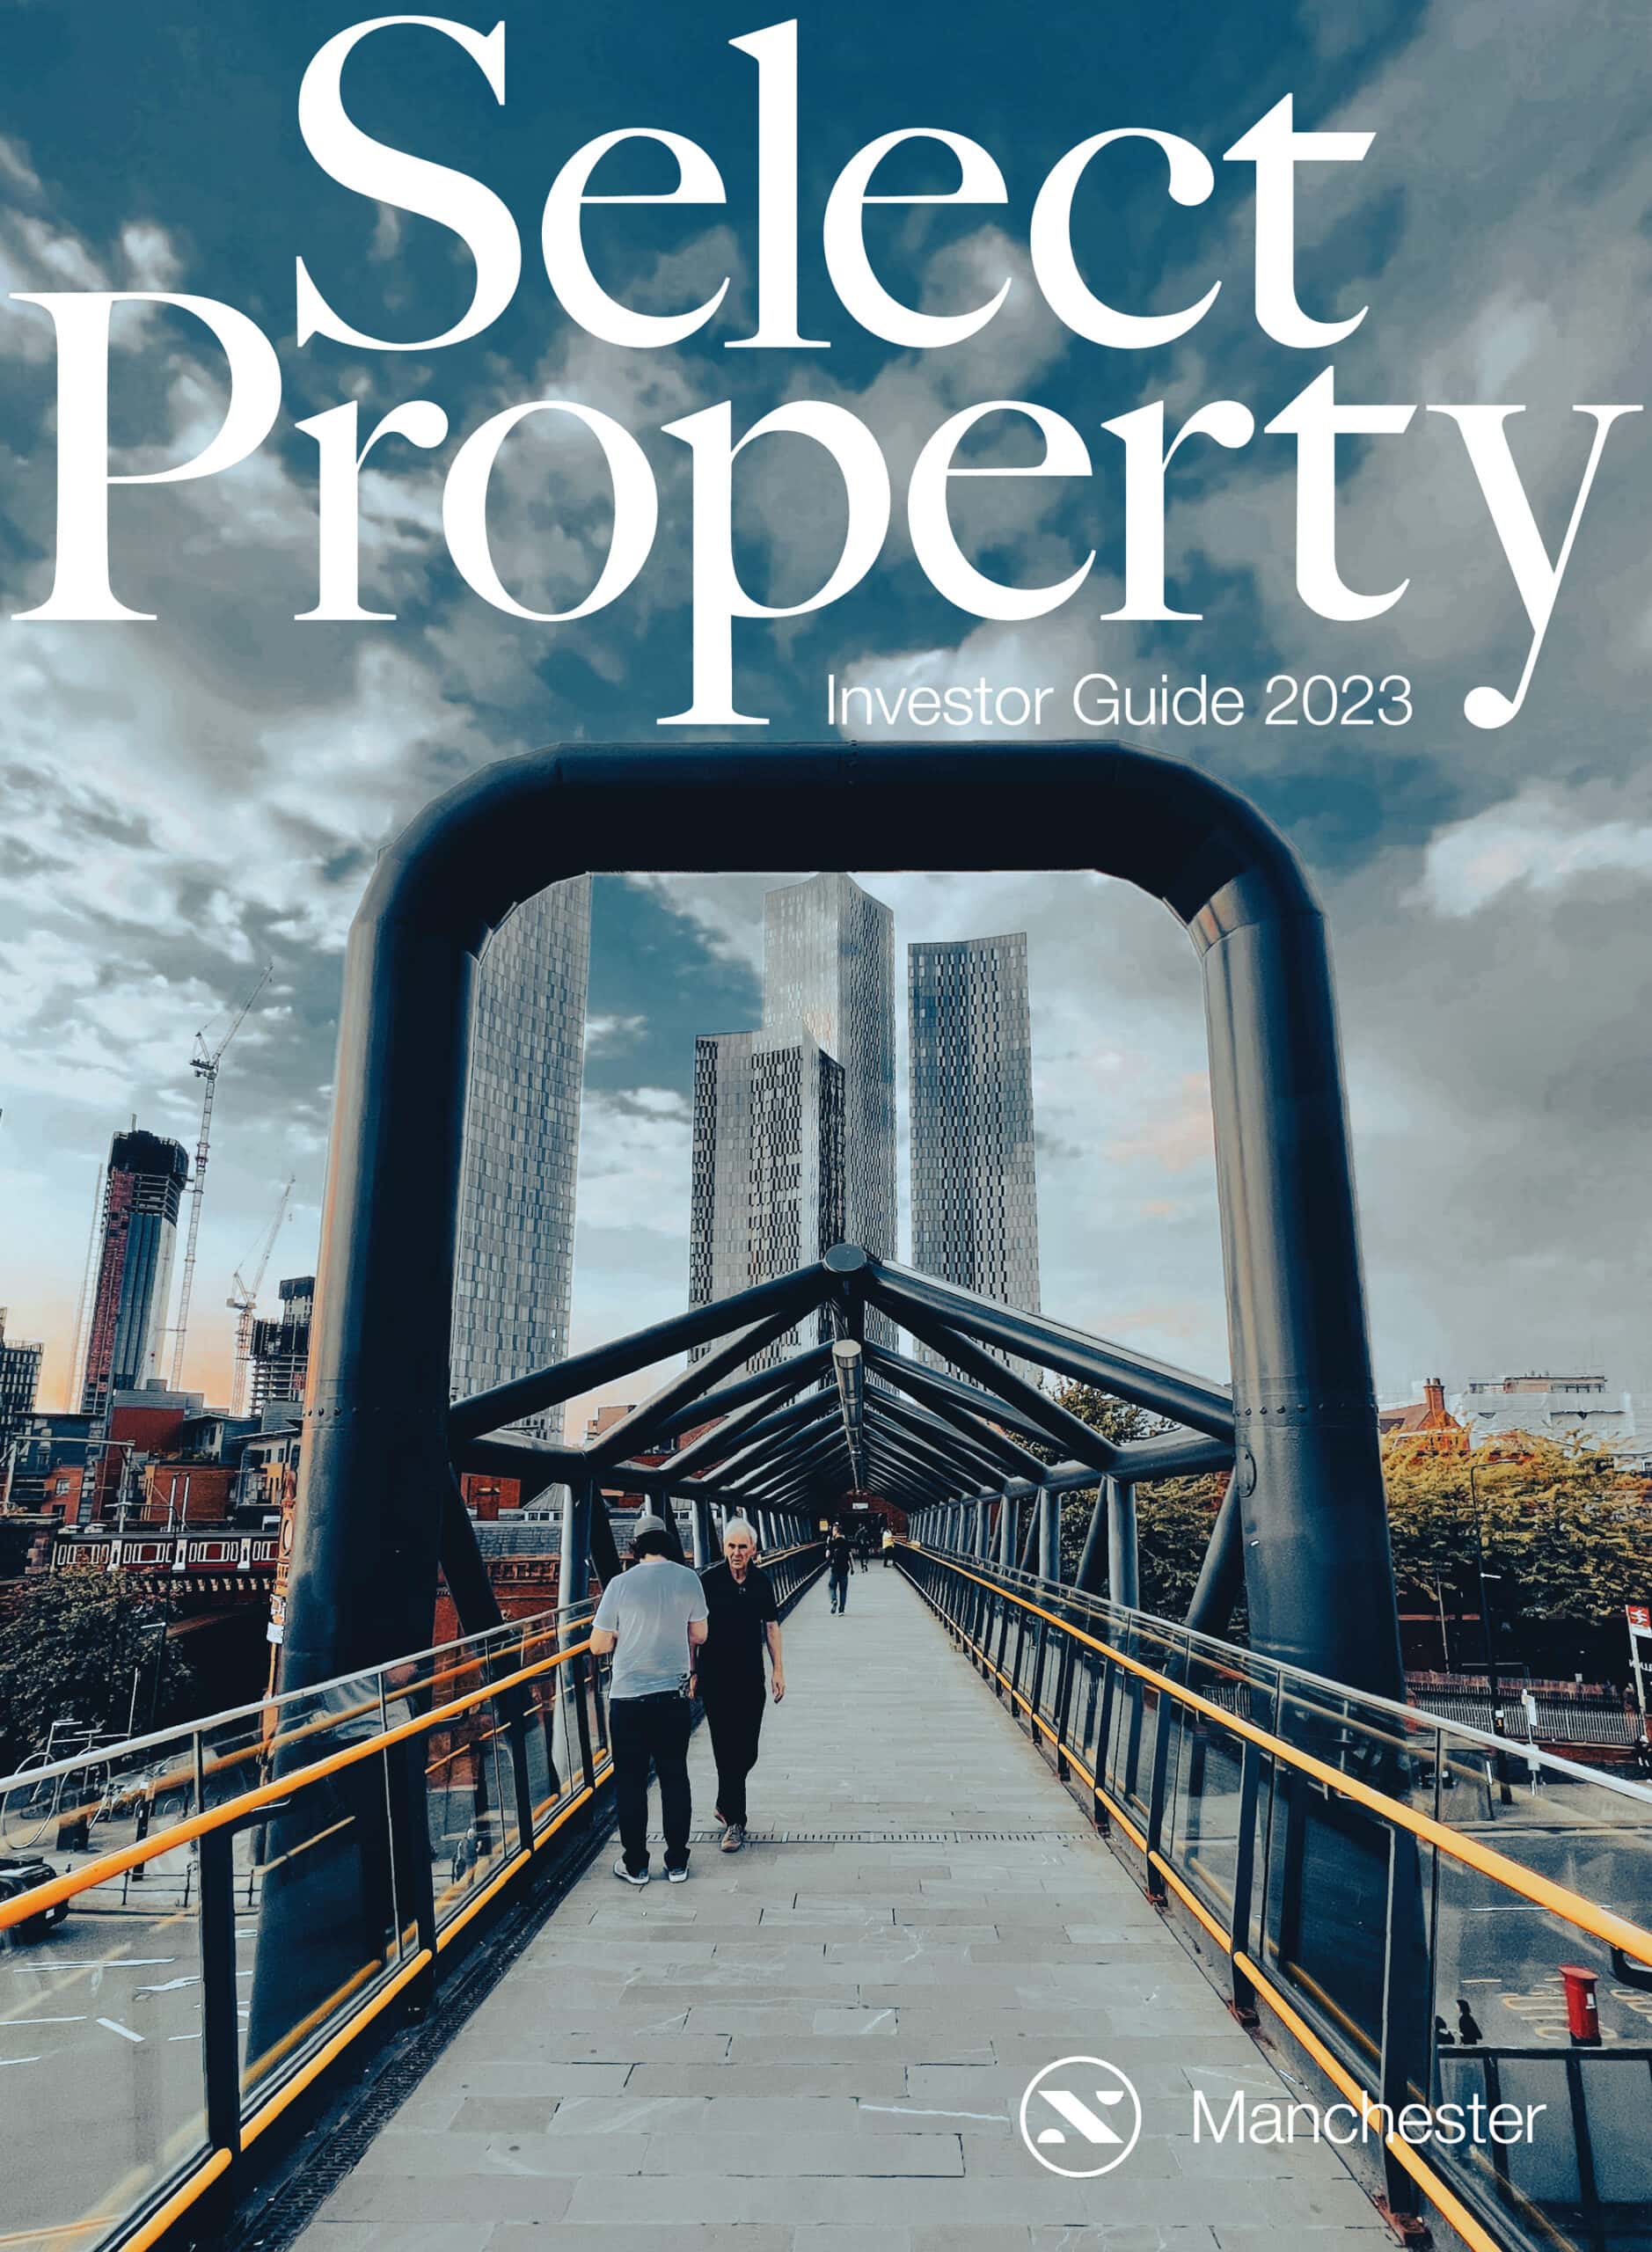 Manchester Property Investment Guide